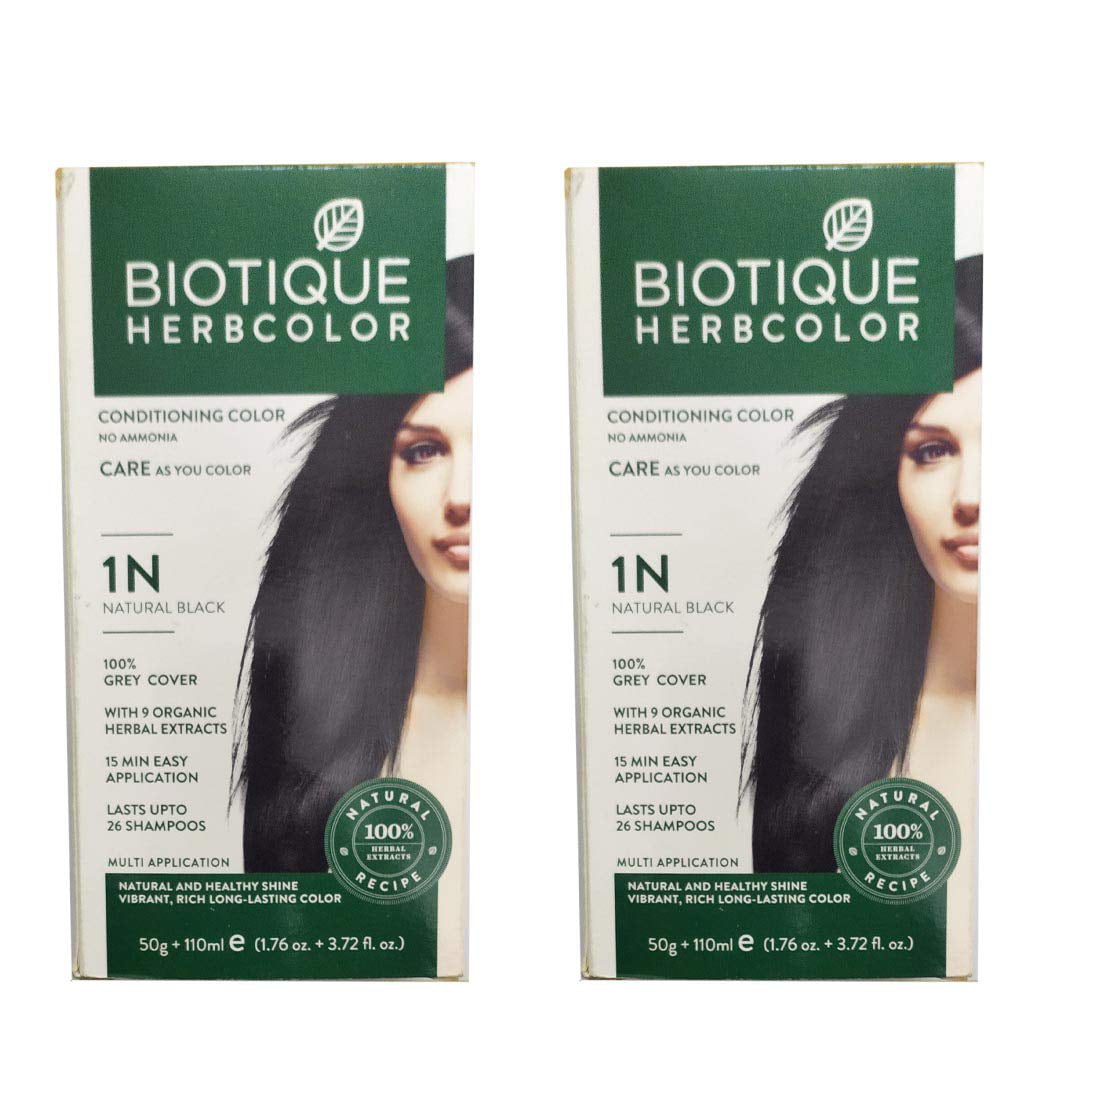 Biotique 2 Herbcolor No Ammonia Conditioning Hair Color (1n Natural Black,  50 g + 110ml) 